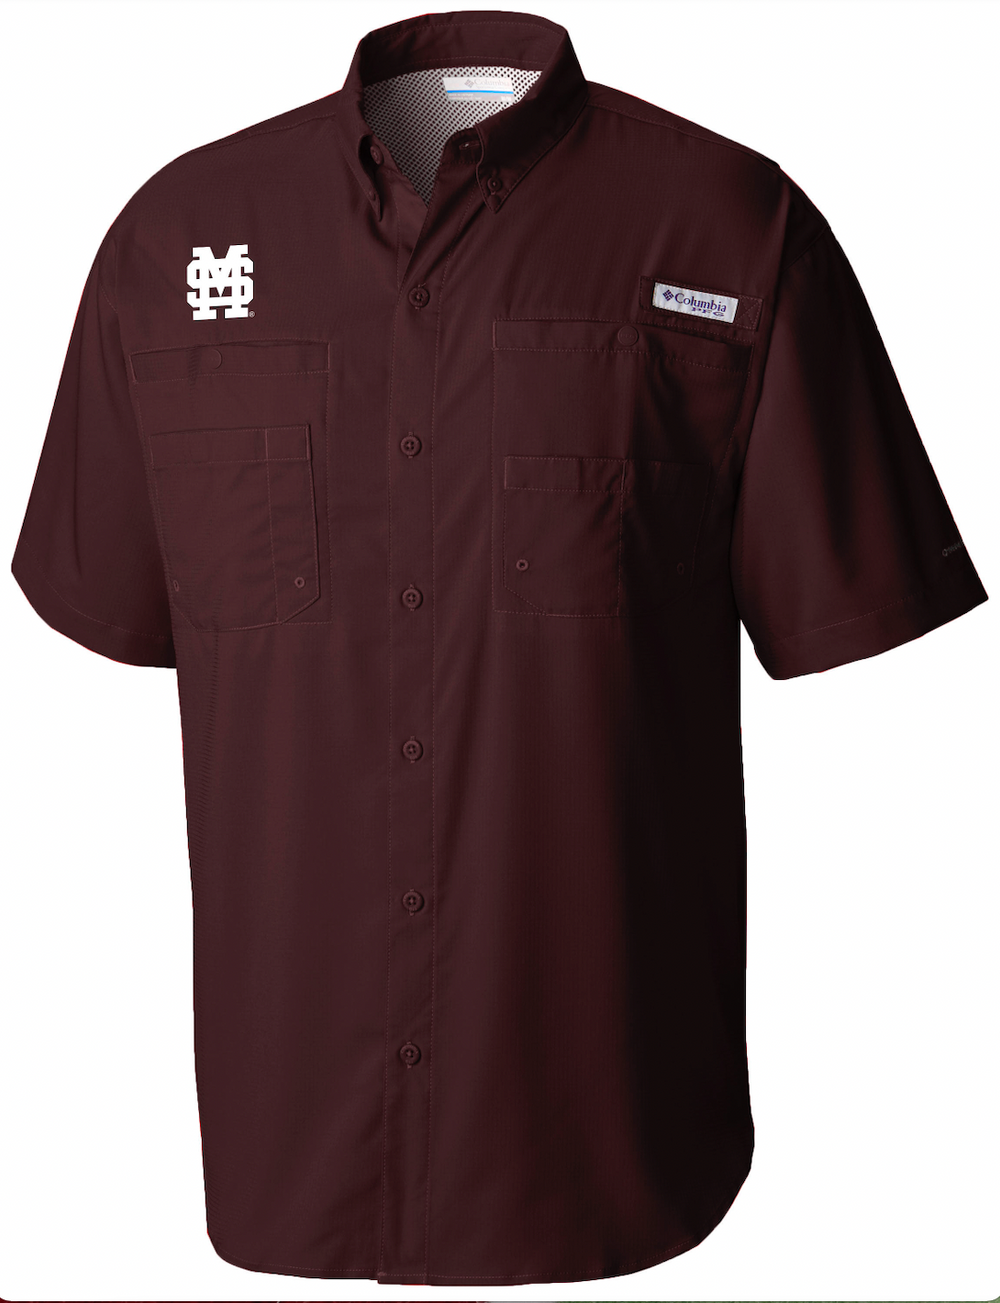 Columbia Men's Maroon Tamiami M over S Button Down Shirt - Mississippi State